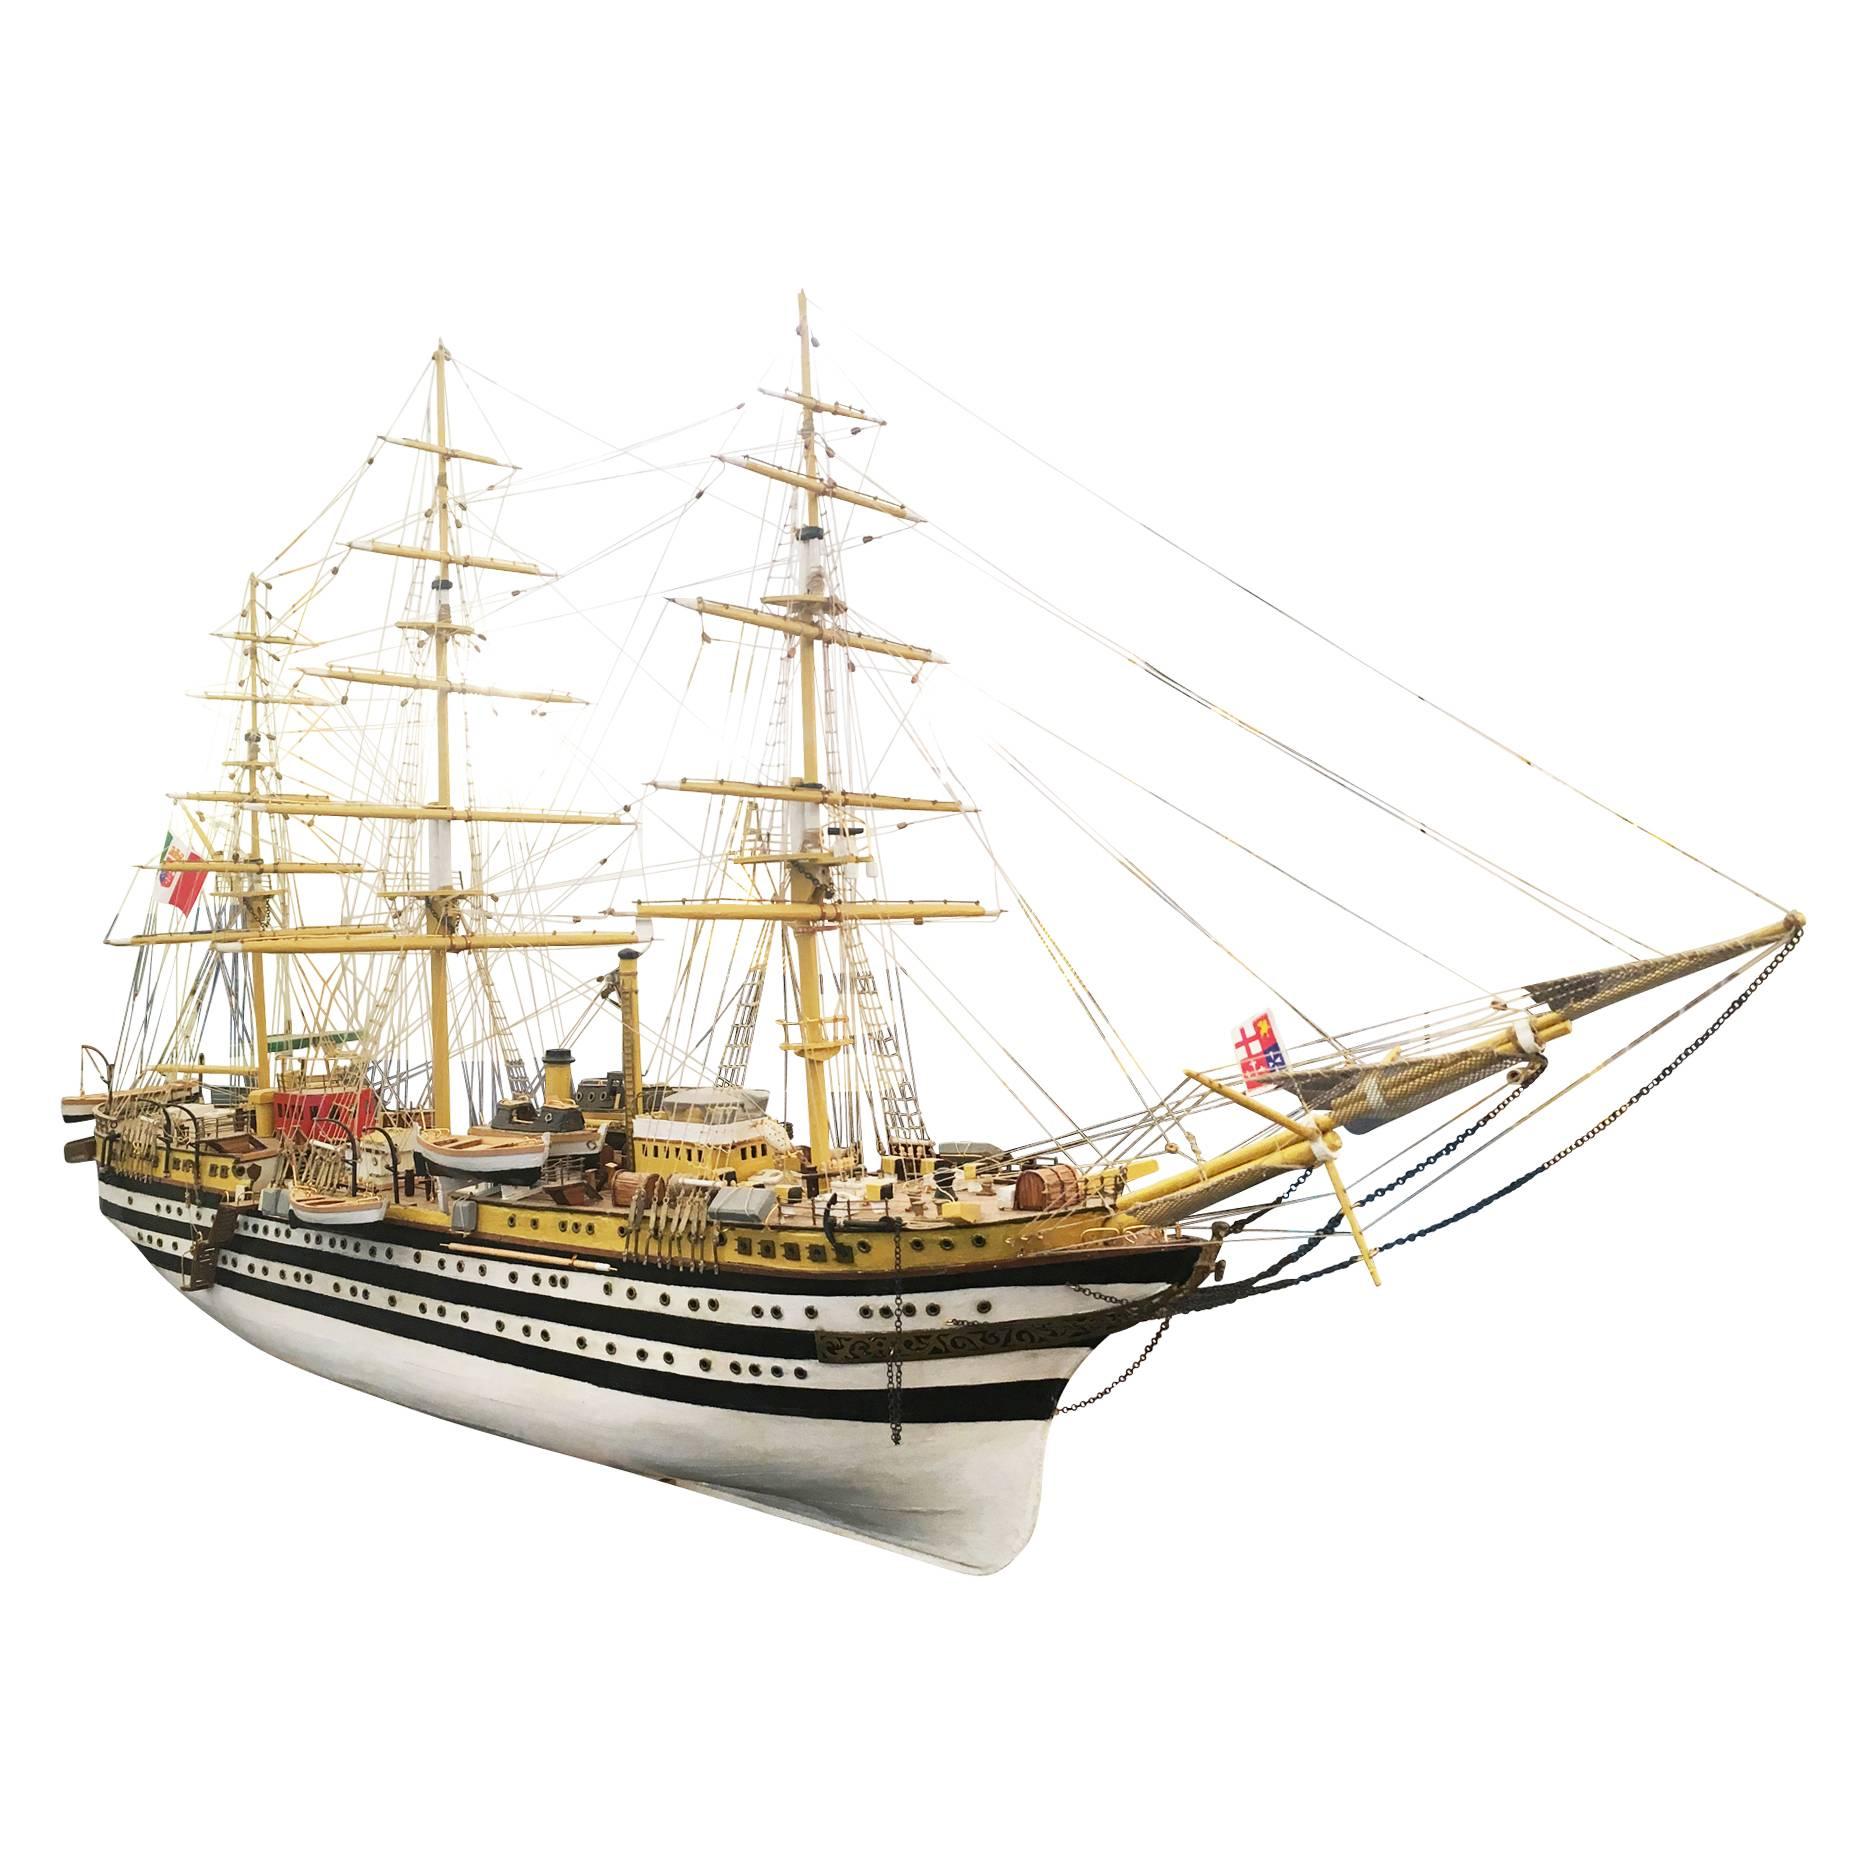 Beautifully detailed wooden model ship of famous Italian training ship, Amerigo Vespucci. Handmade in the 1970s. The entire piece is made of wood with brass fittings.

Available for viewing at Gaspare Asaro-Italian Modern in NYC